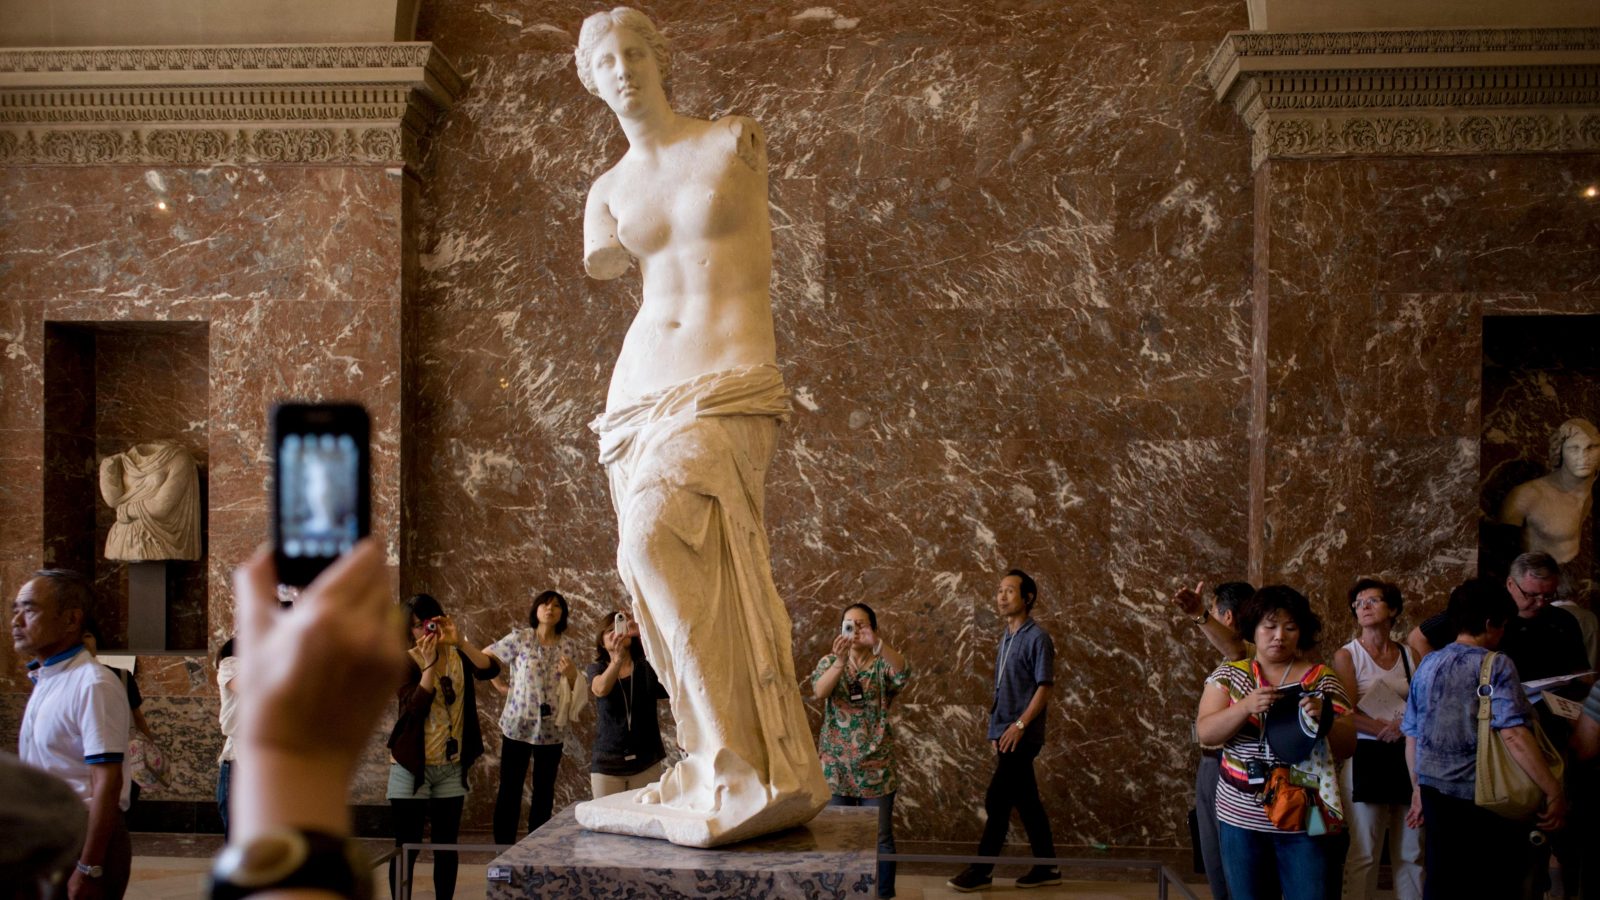 85% Of People Can’t Get 12/15 on This Easy General Knowledge Quiz. Can You? Venus de Milo